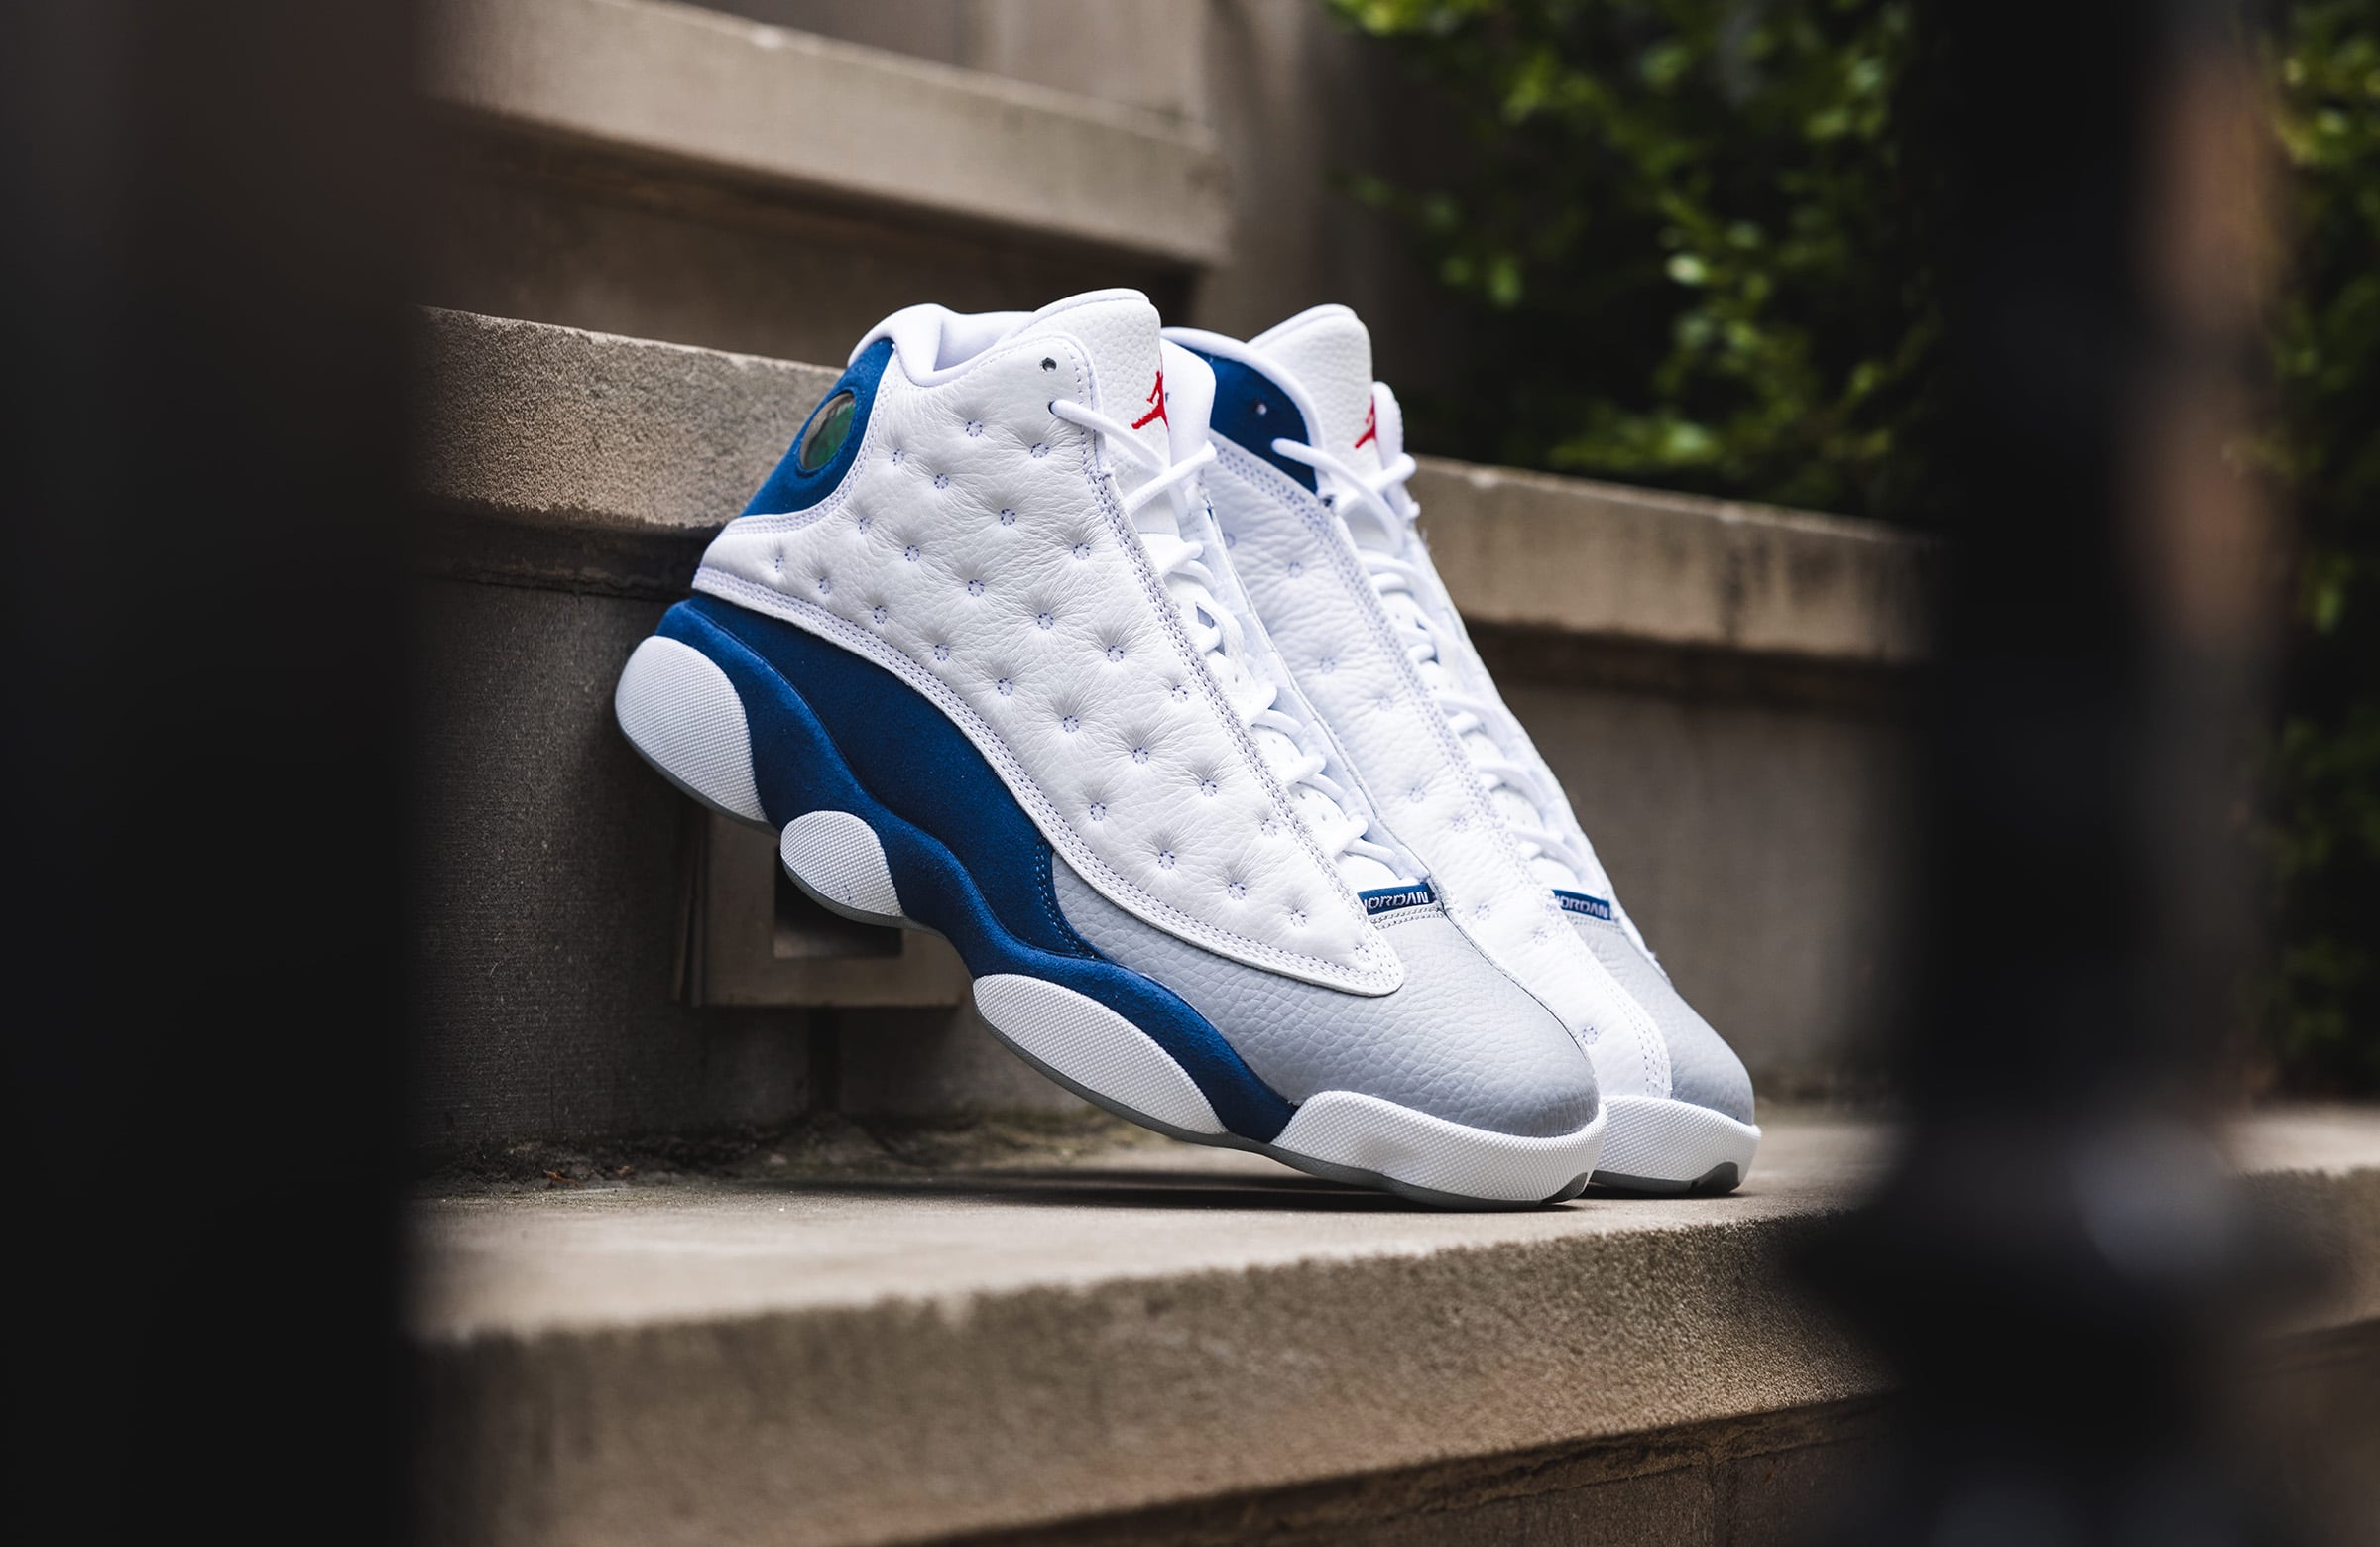 The Air Jordan 13 Retro “French Blue” is Dropping Soon – DTLR